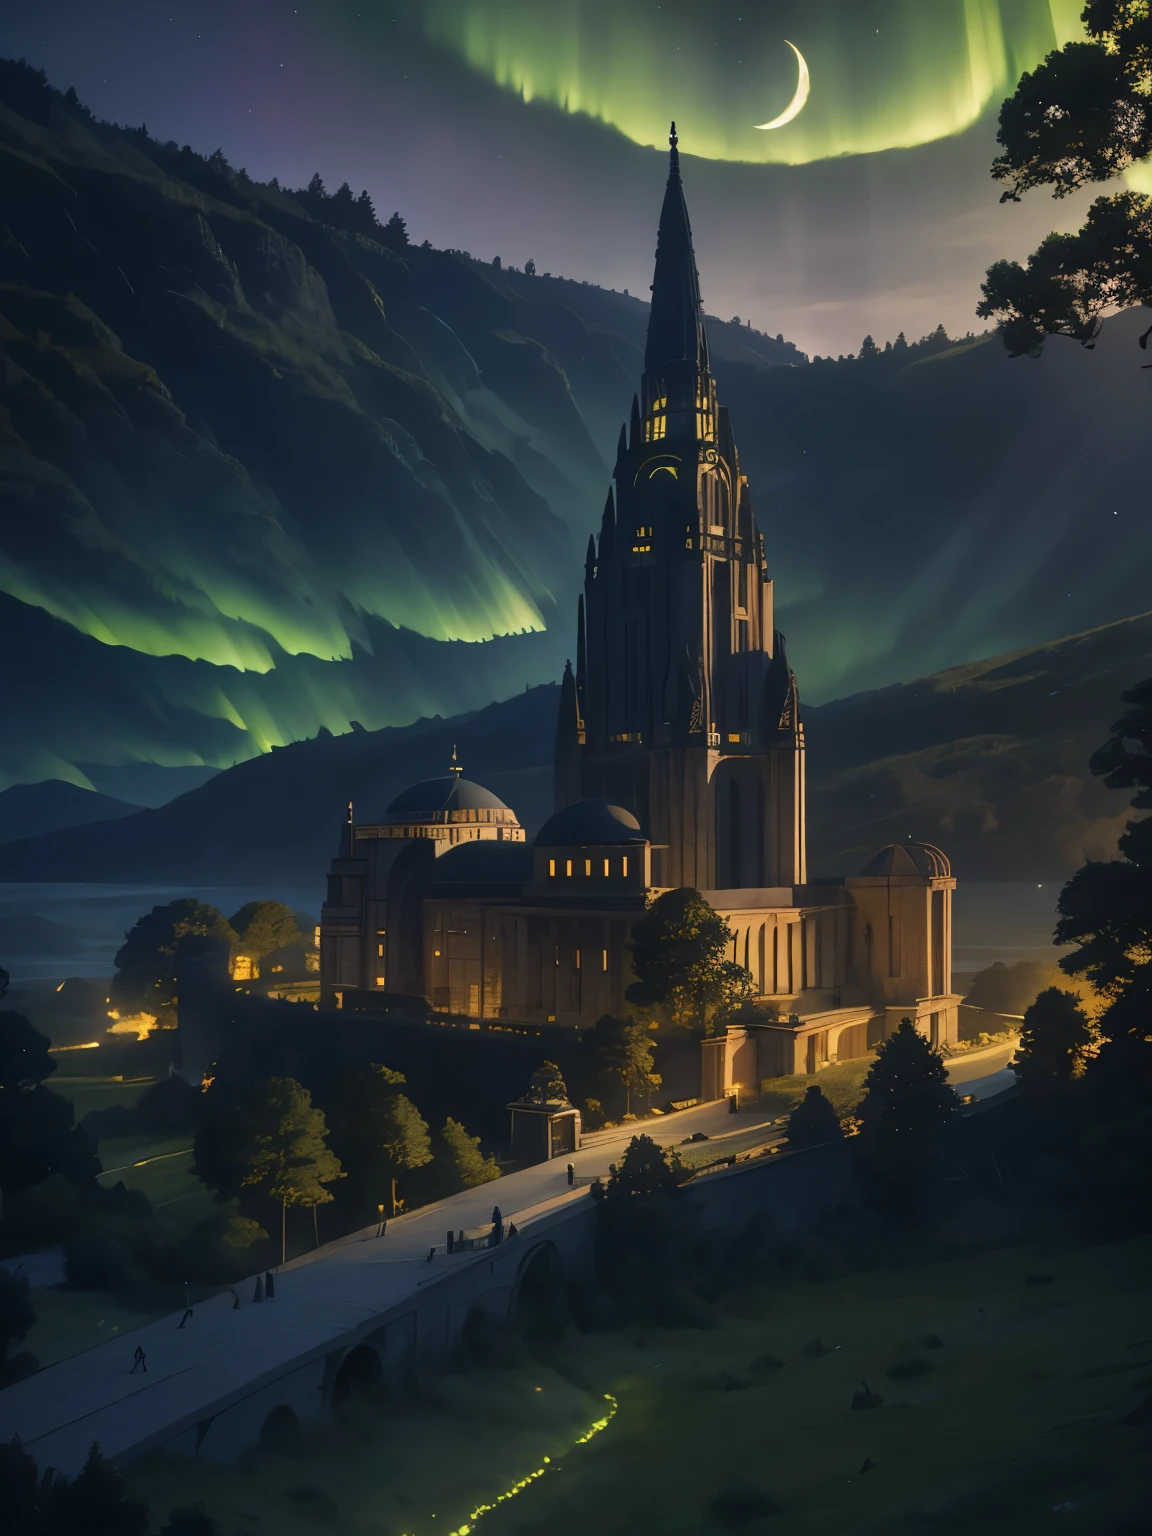 Estilo Ralph McQuarrie, greek architecture done in a sci-fi style on a lindo forest and meadow scene with tall buildings and open green spaces, óleo, lindo, Muito detalhado, Aurora、Crescent Moon、Castelo flutuante